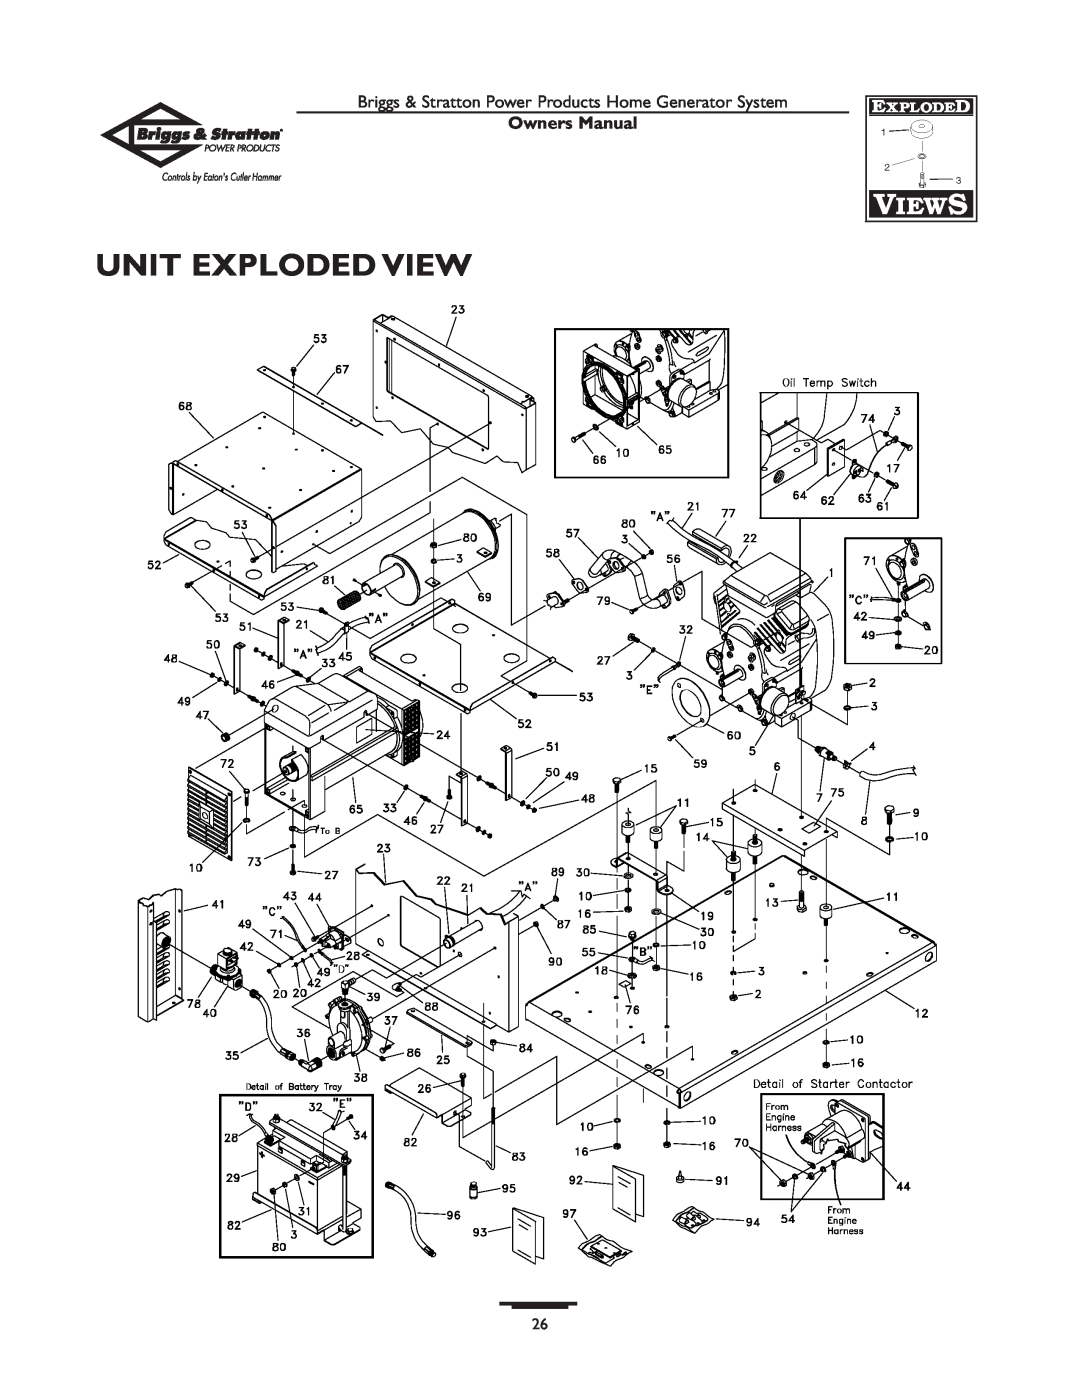 Briggs & Stratton 190839GS owner manual Unit Exploded View, Owners Manual 